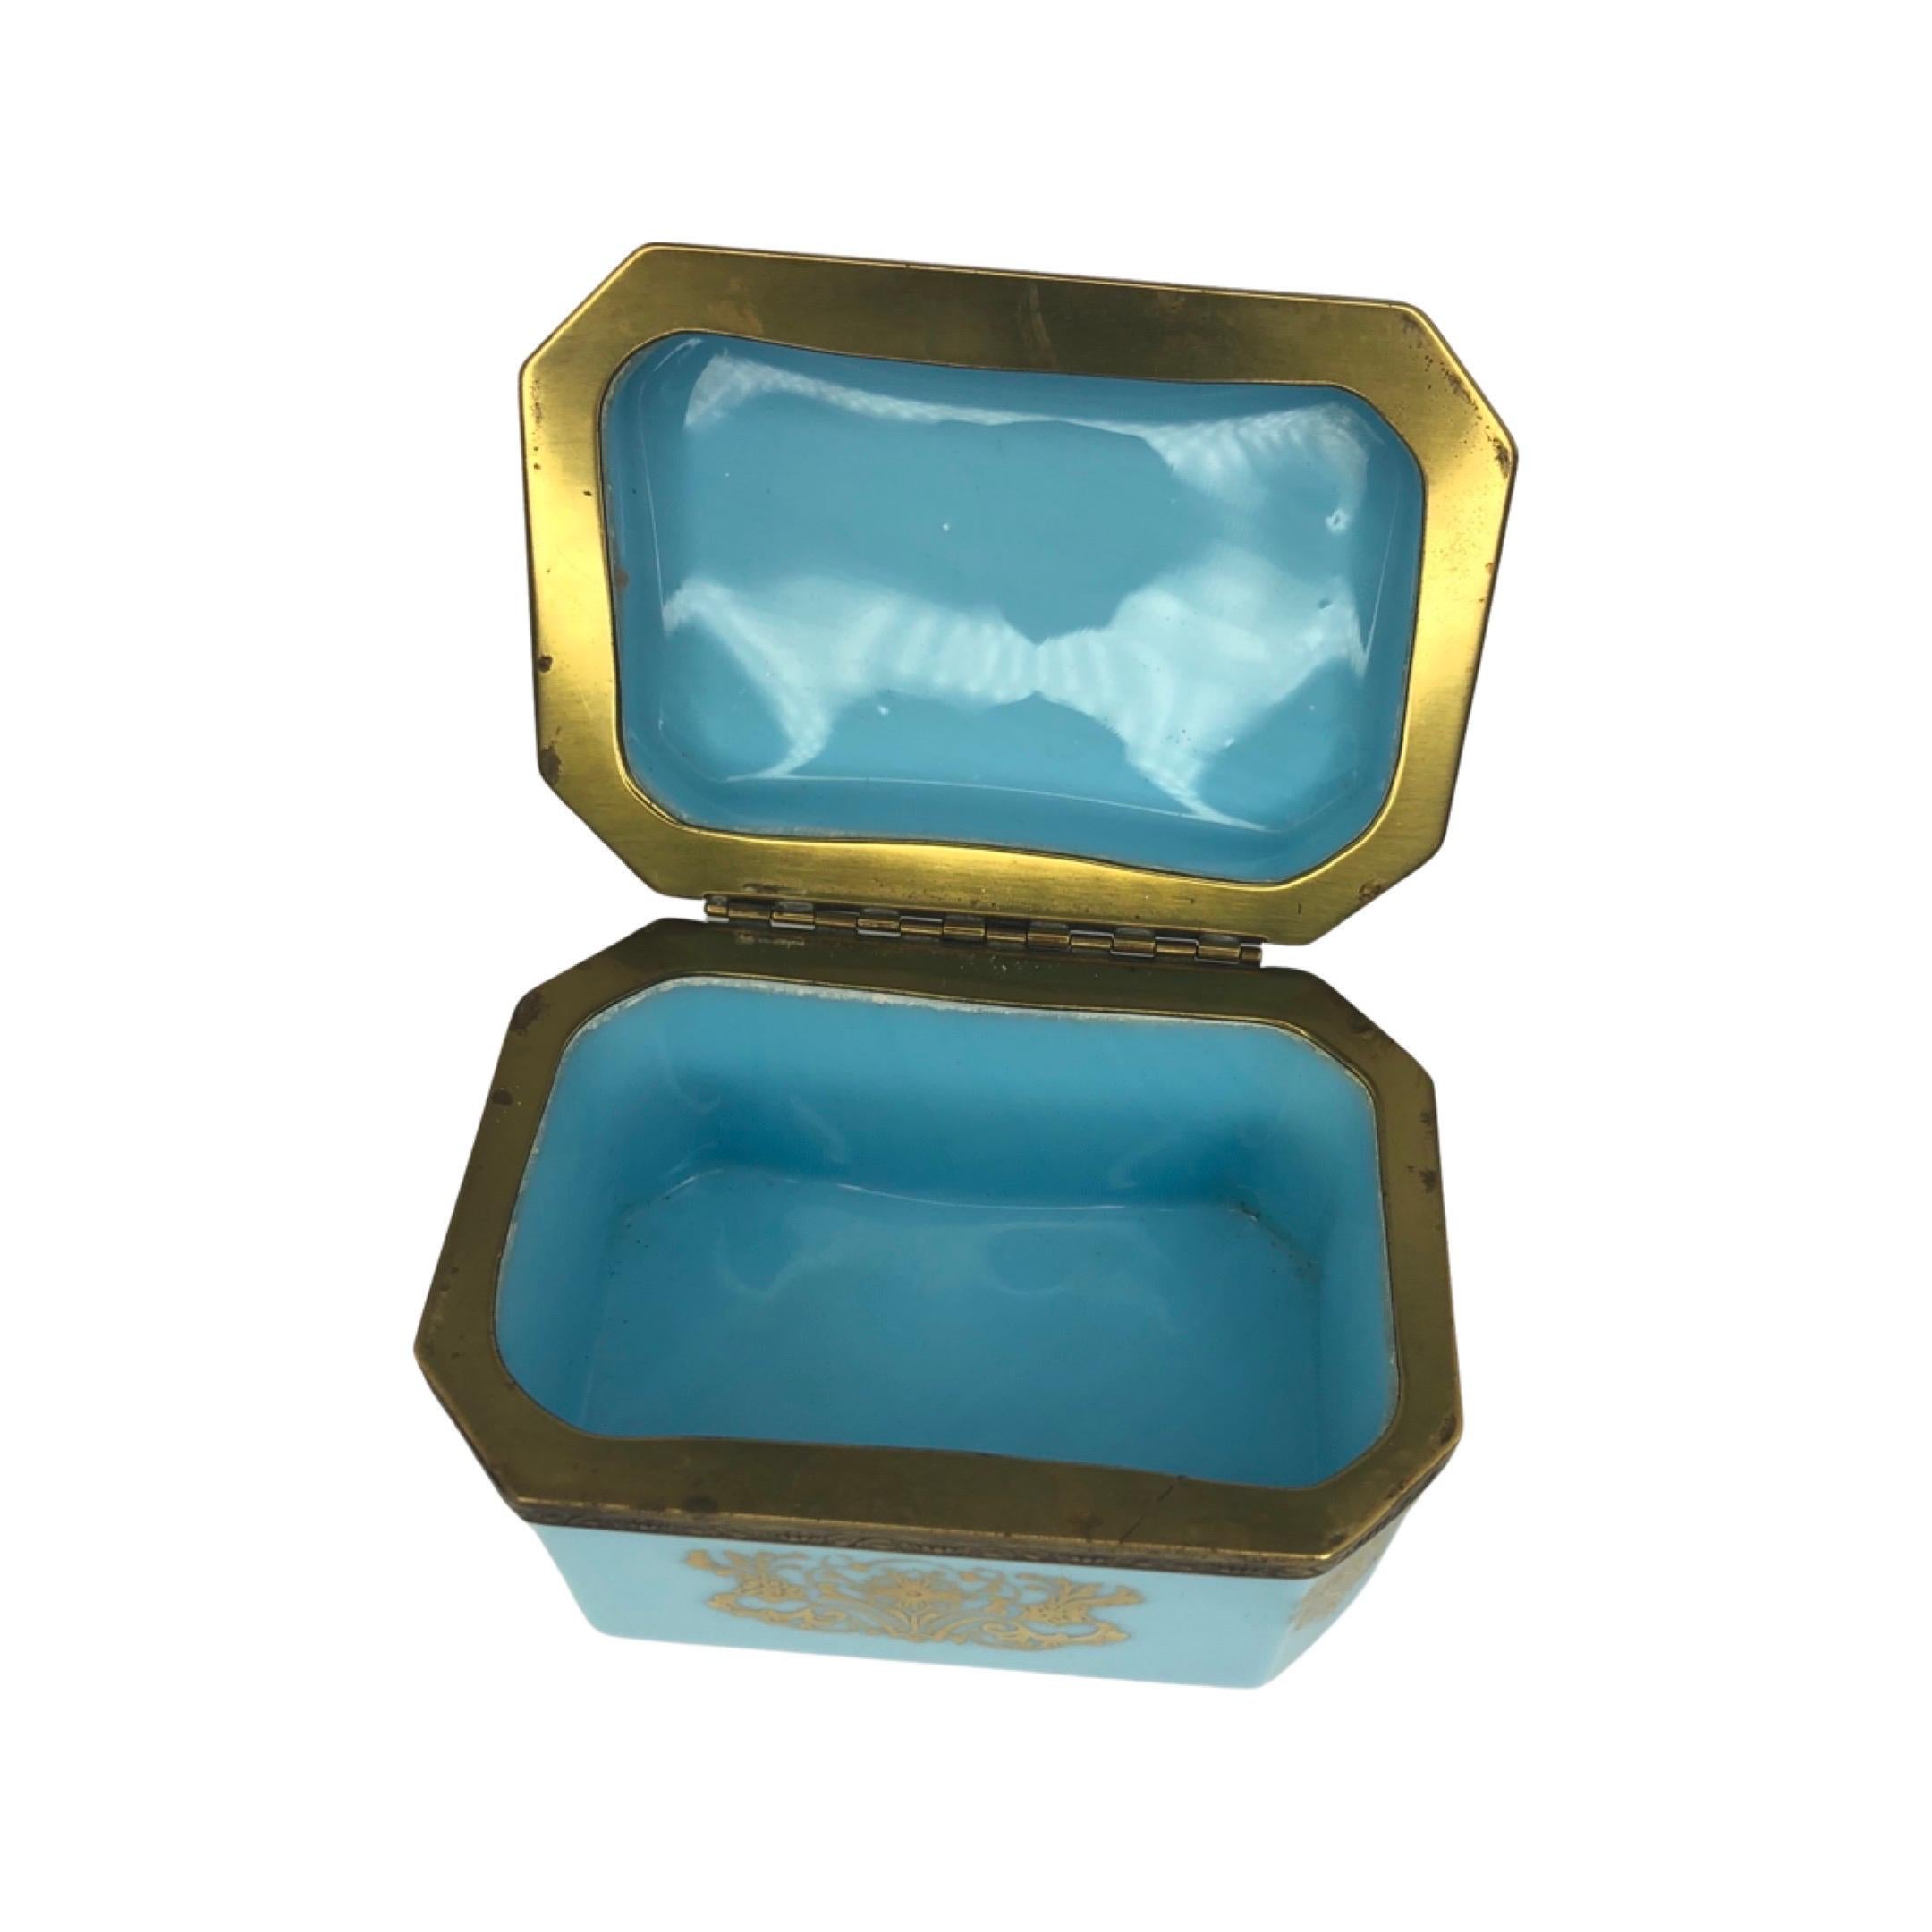 French blue opaline and bronze jewelry or vanity box, hand painted with delicate gold decoration. This early 20th Century French box is small yet heavy in weight for its size. The jewelry box has bronze fittings with applied gilt decoration. These